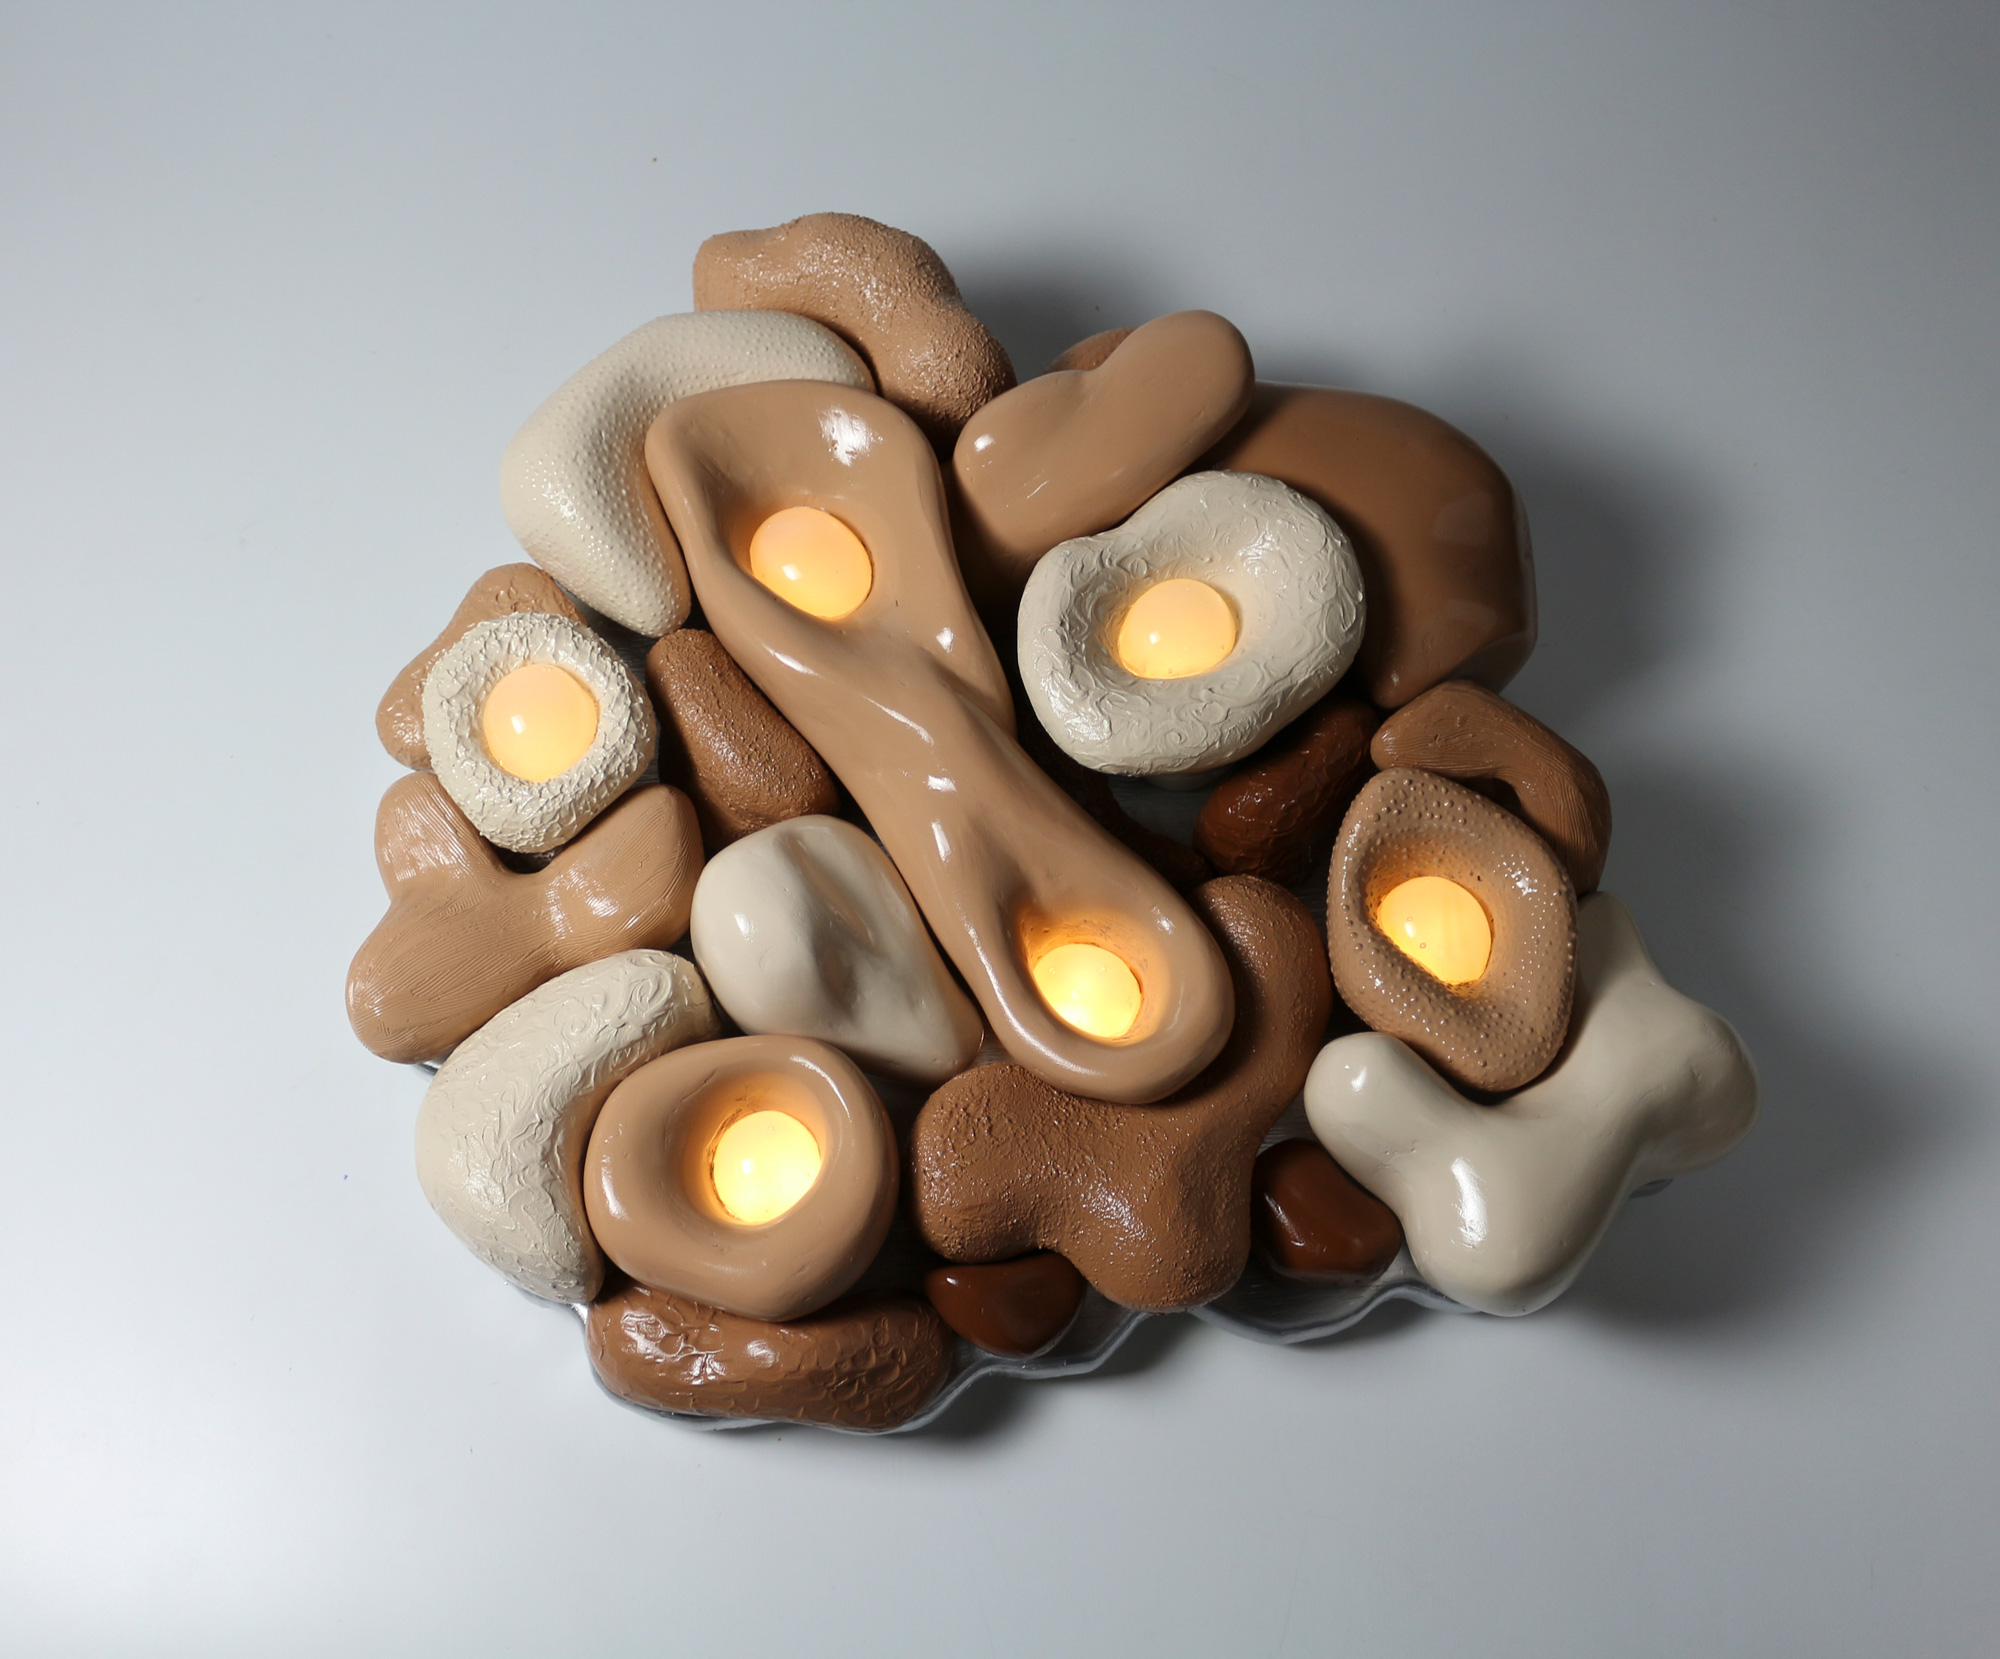 Sculpture featuring clay and light